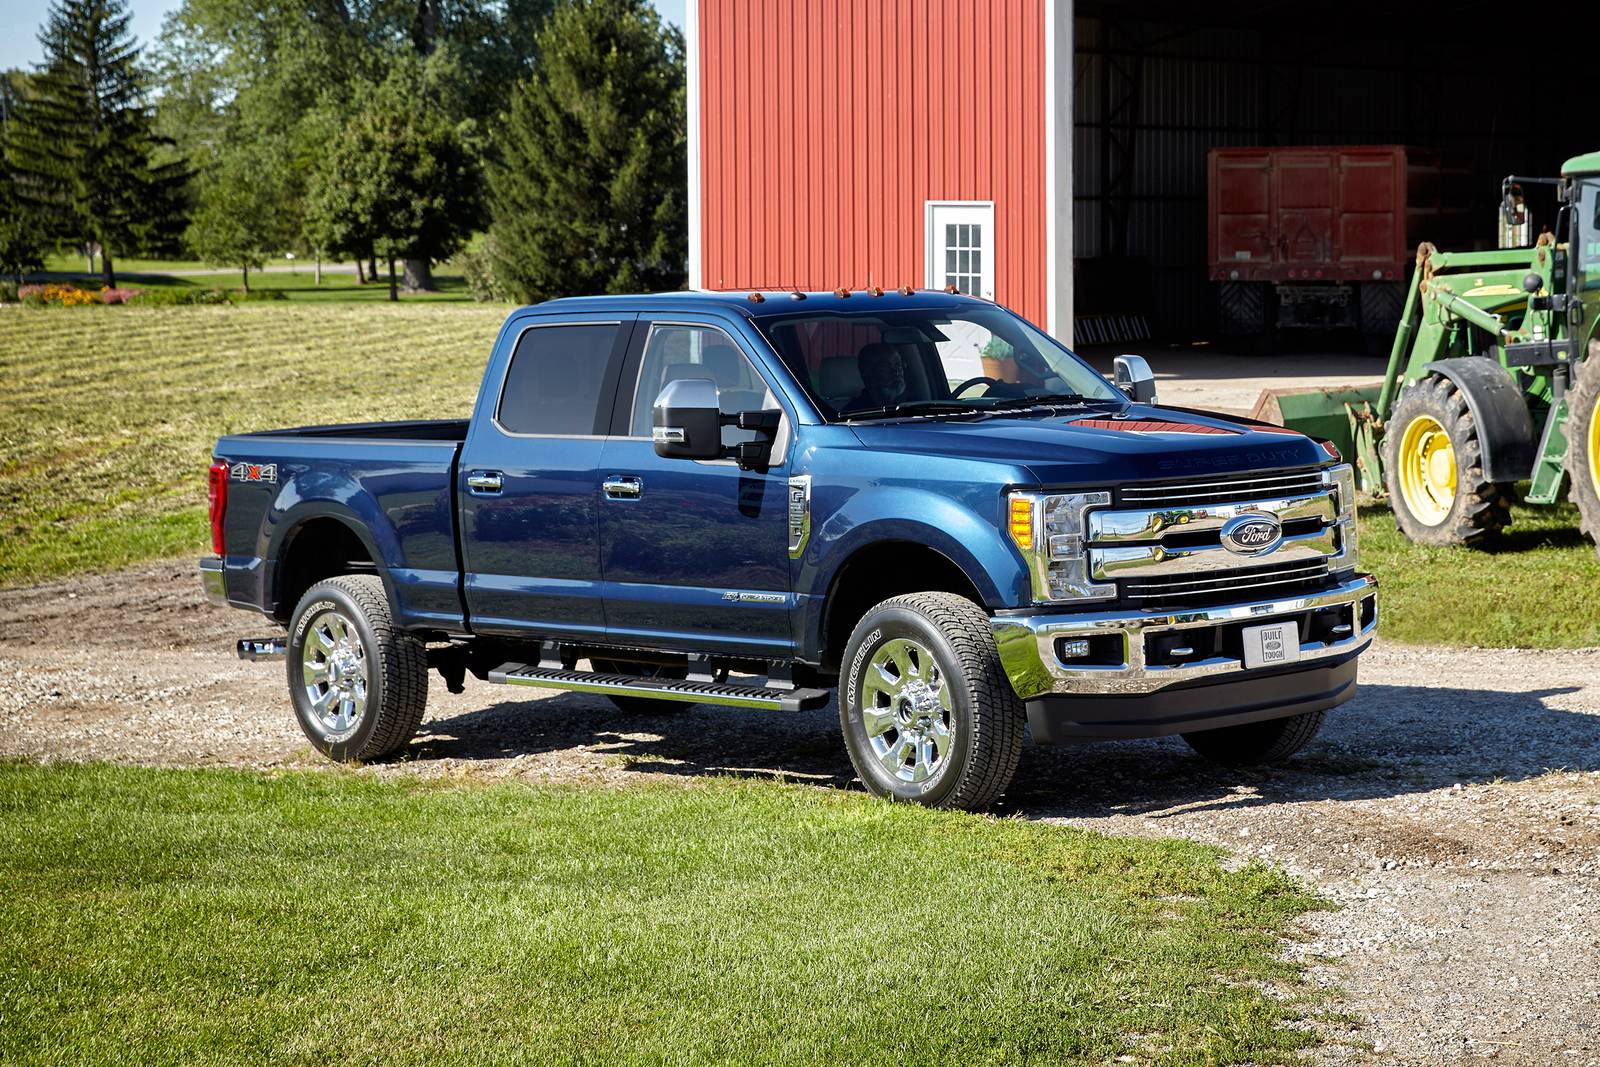 Used 2018 Ford F-250 Super Duty Crew Cab Review | Edmunds